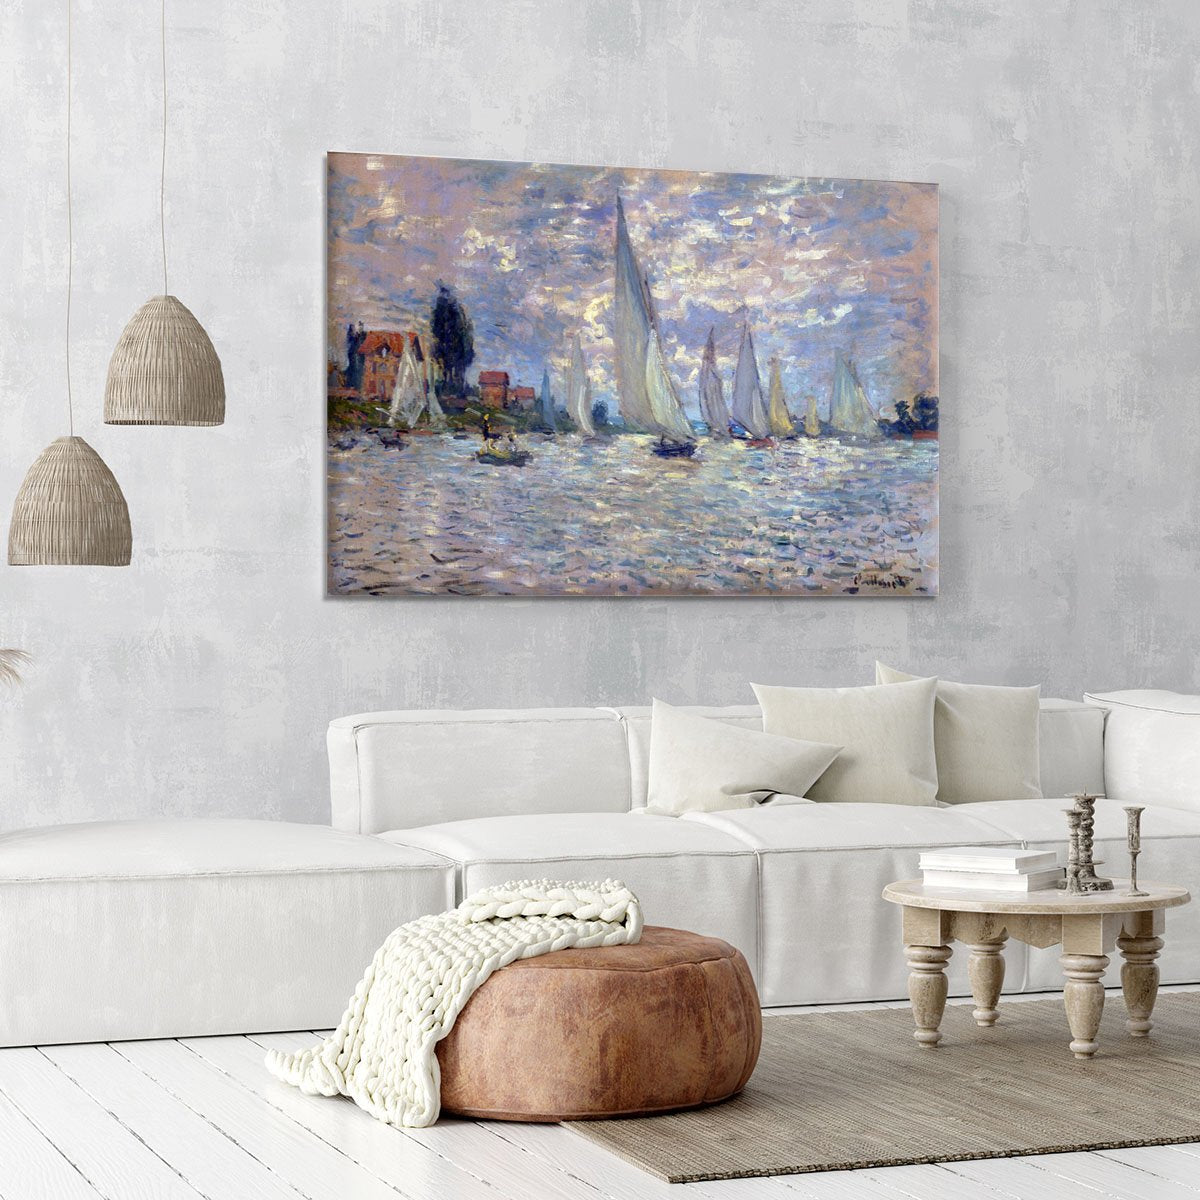 Les Barques by Monet Canvas Print or Poster